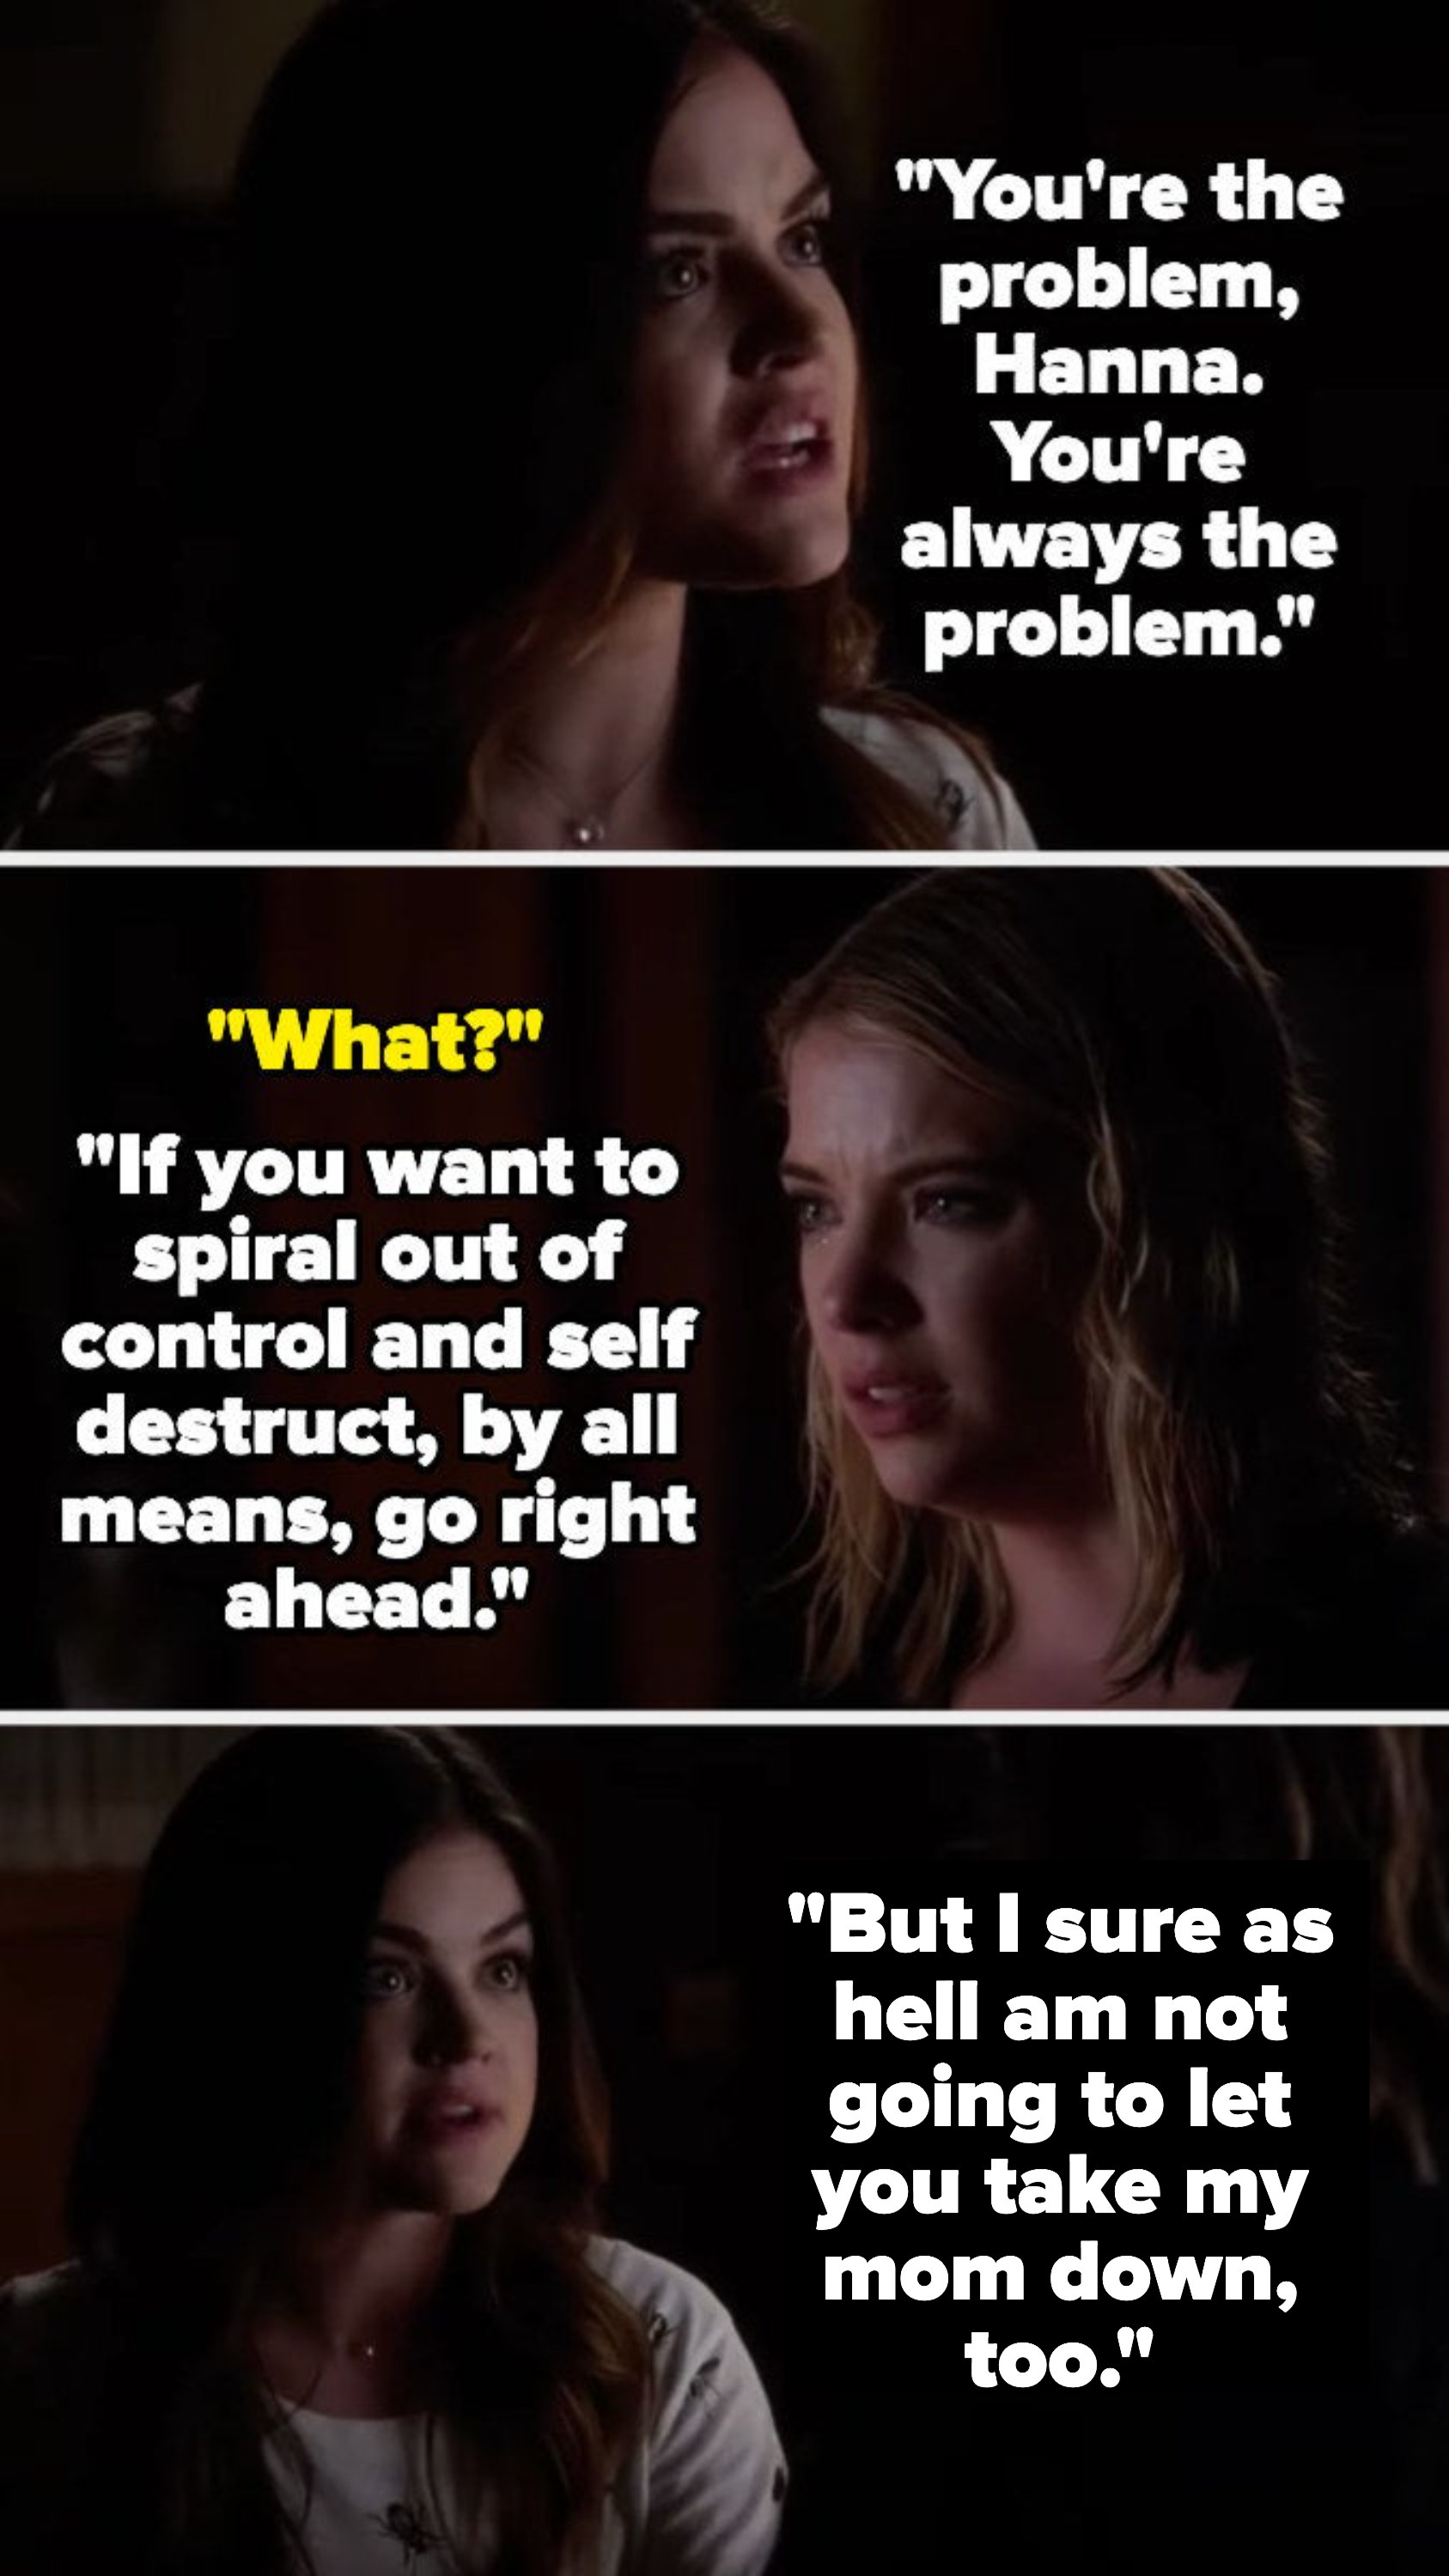 on pretty little liars, aria says hanna is the problem like she always is and that if she wants to self destruct that&#x27;s fine, but she won&#x27;t let her take aria&#x27;s mom down with her